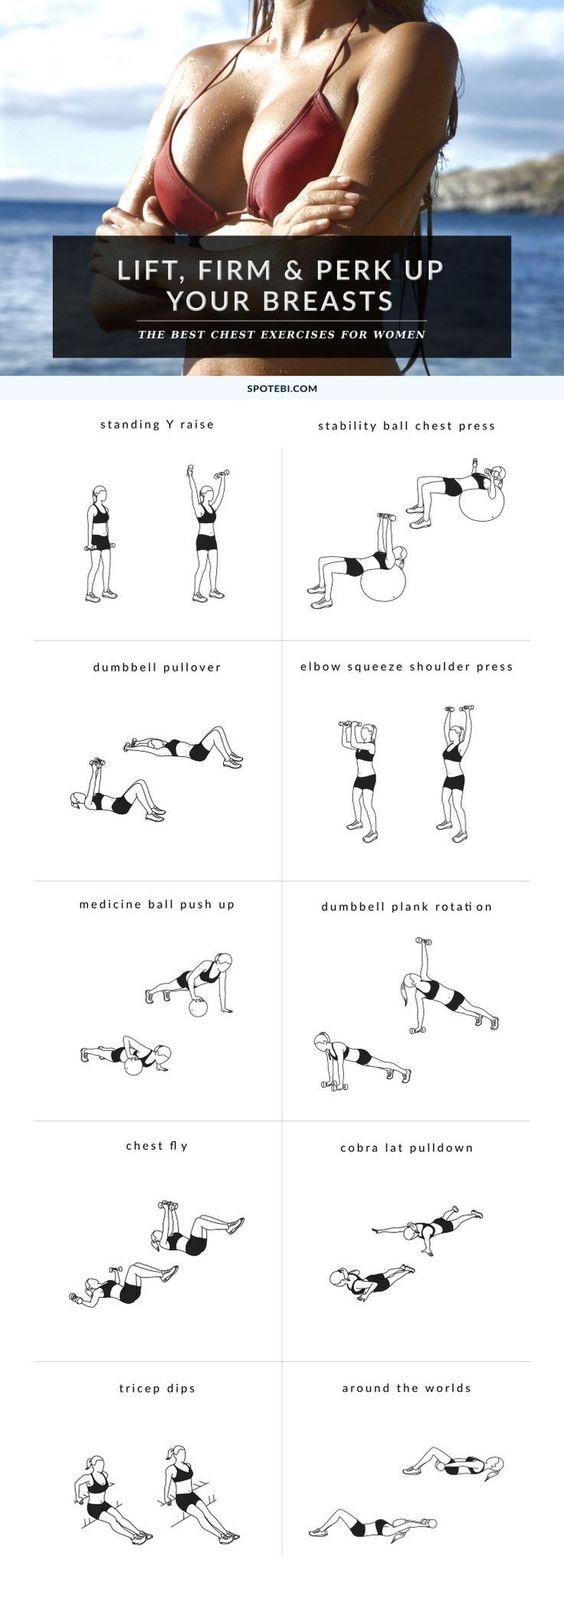 Chest Workout Routine for Women at home, Best Exercises to tone and lift  your Chest